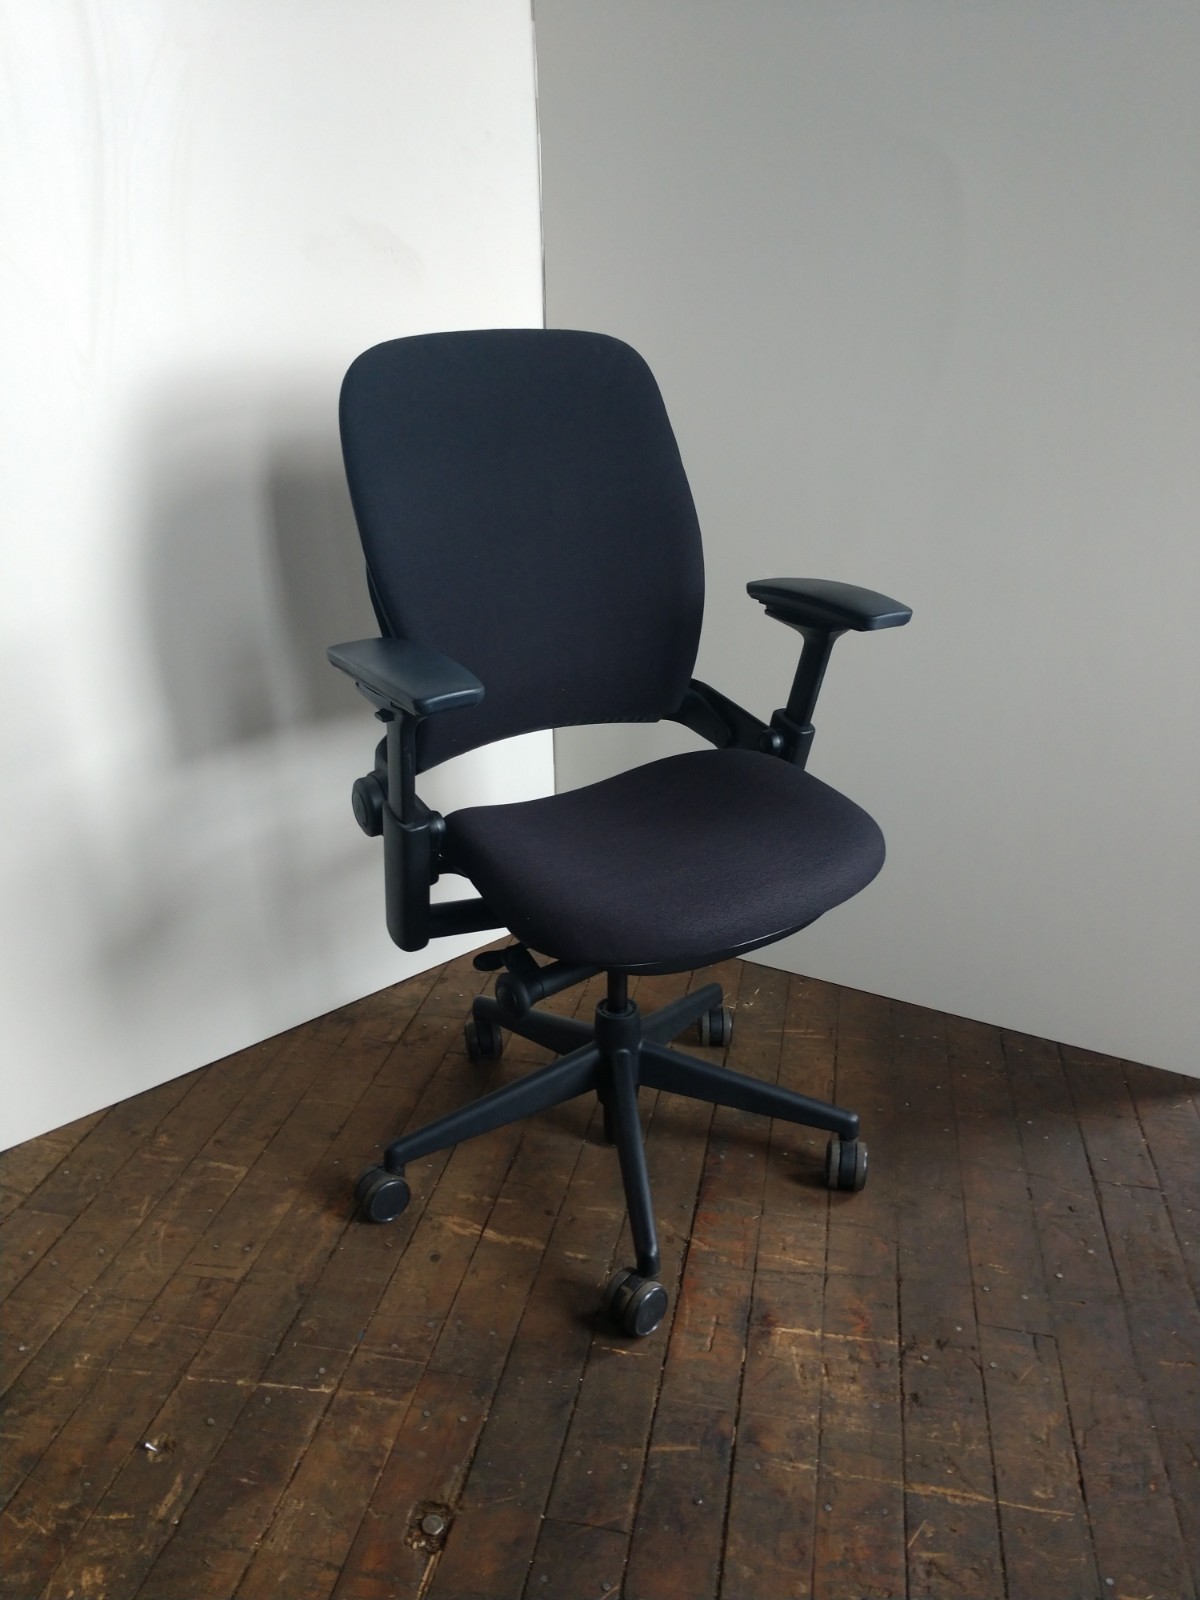 C61430 - Steelcase Leap Chairs